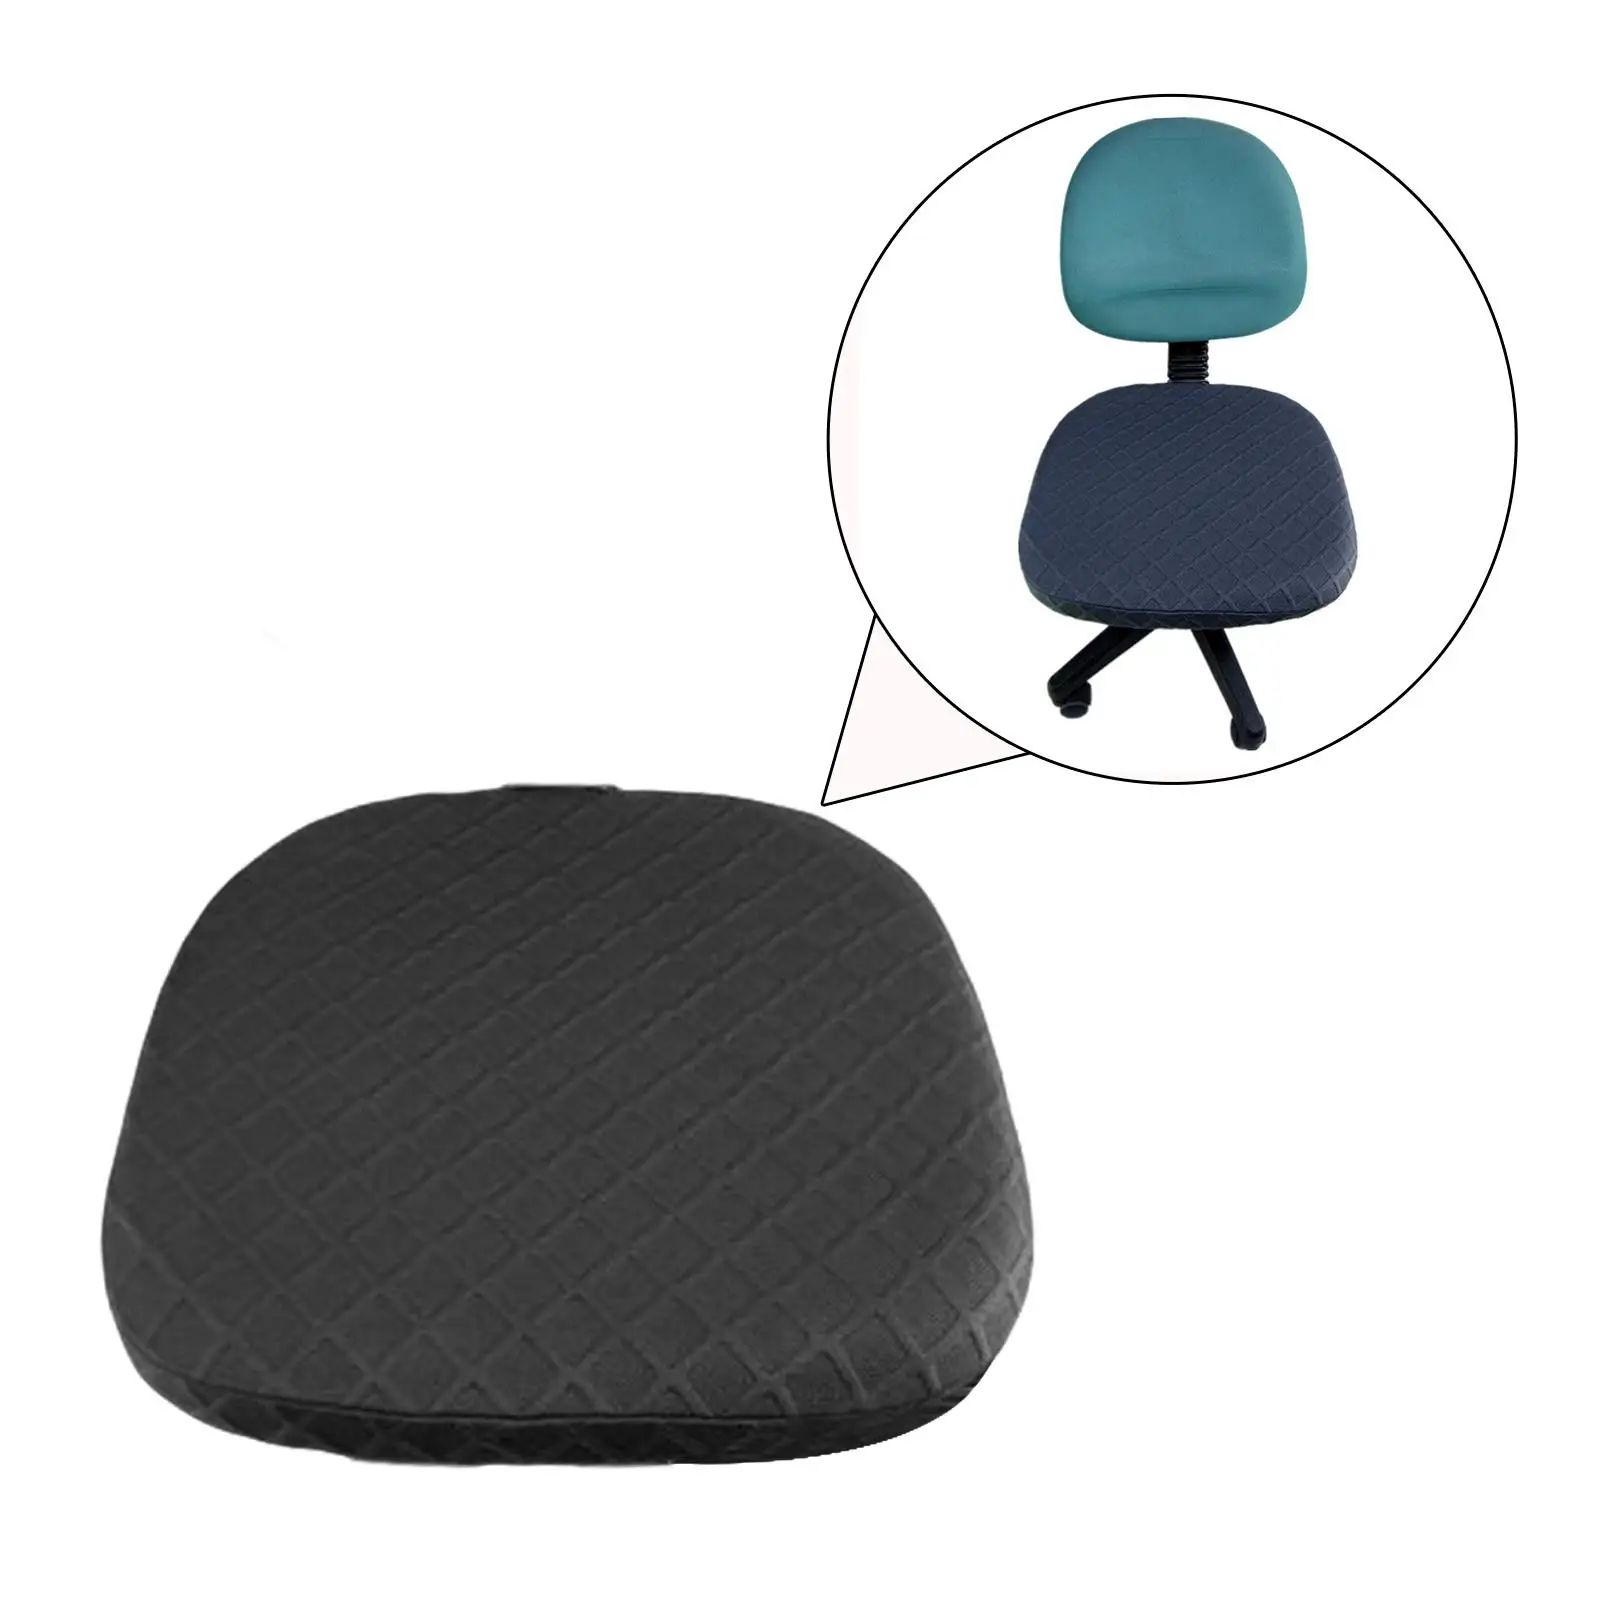 Stretchable Jacquard Office Chair Seat Cushion Cover Protector Flexible for Office Workers Solid Pattern Anti Slip Removable